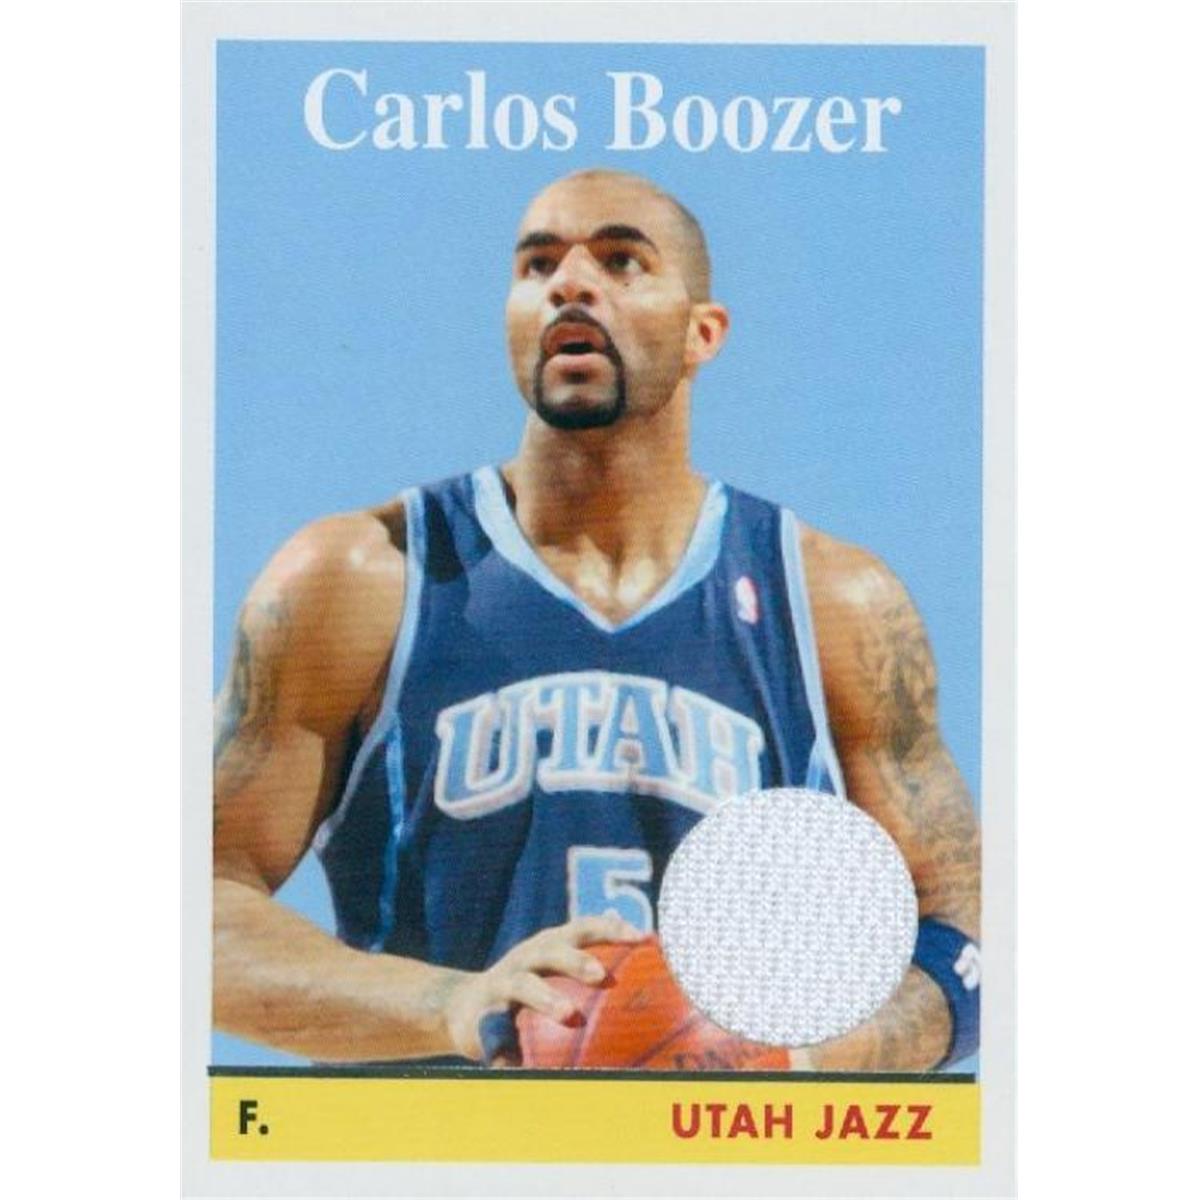 Picture of Autograph Warehouse 409234 Carlos Boozer Player Worn Jersey Patch Basketball Card - 2008 Topps Bazooka 8